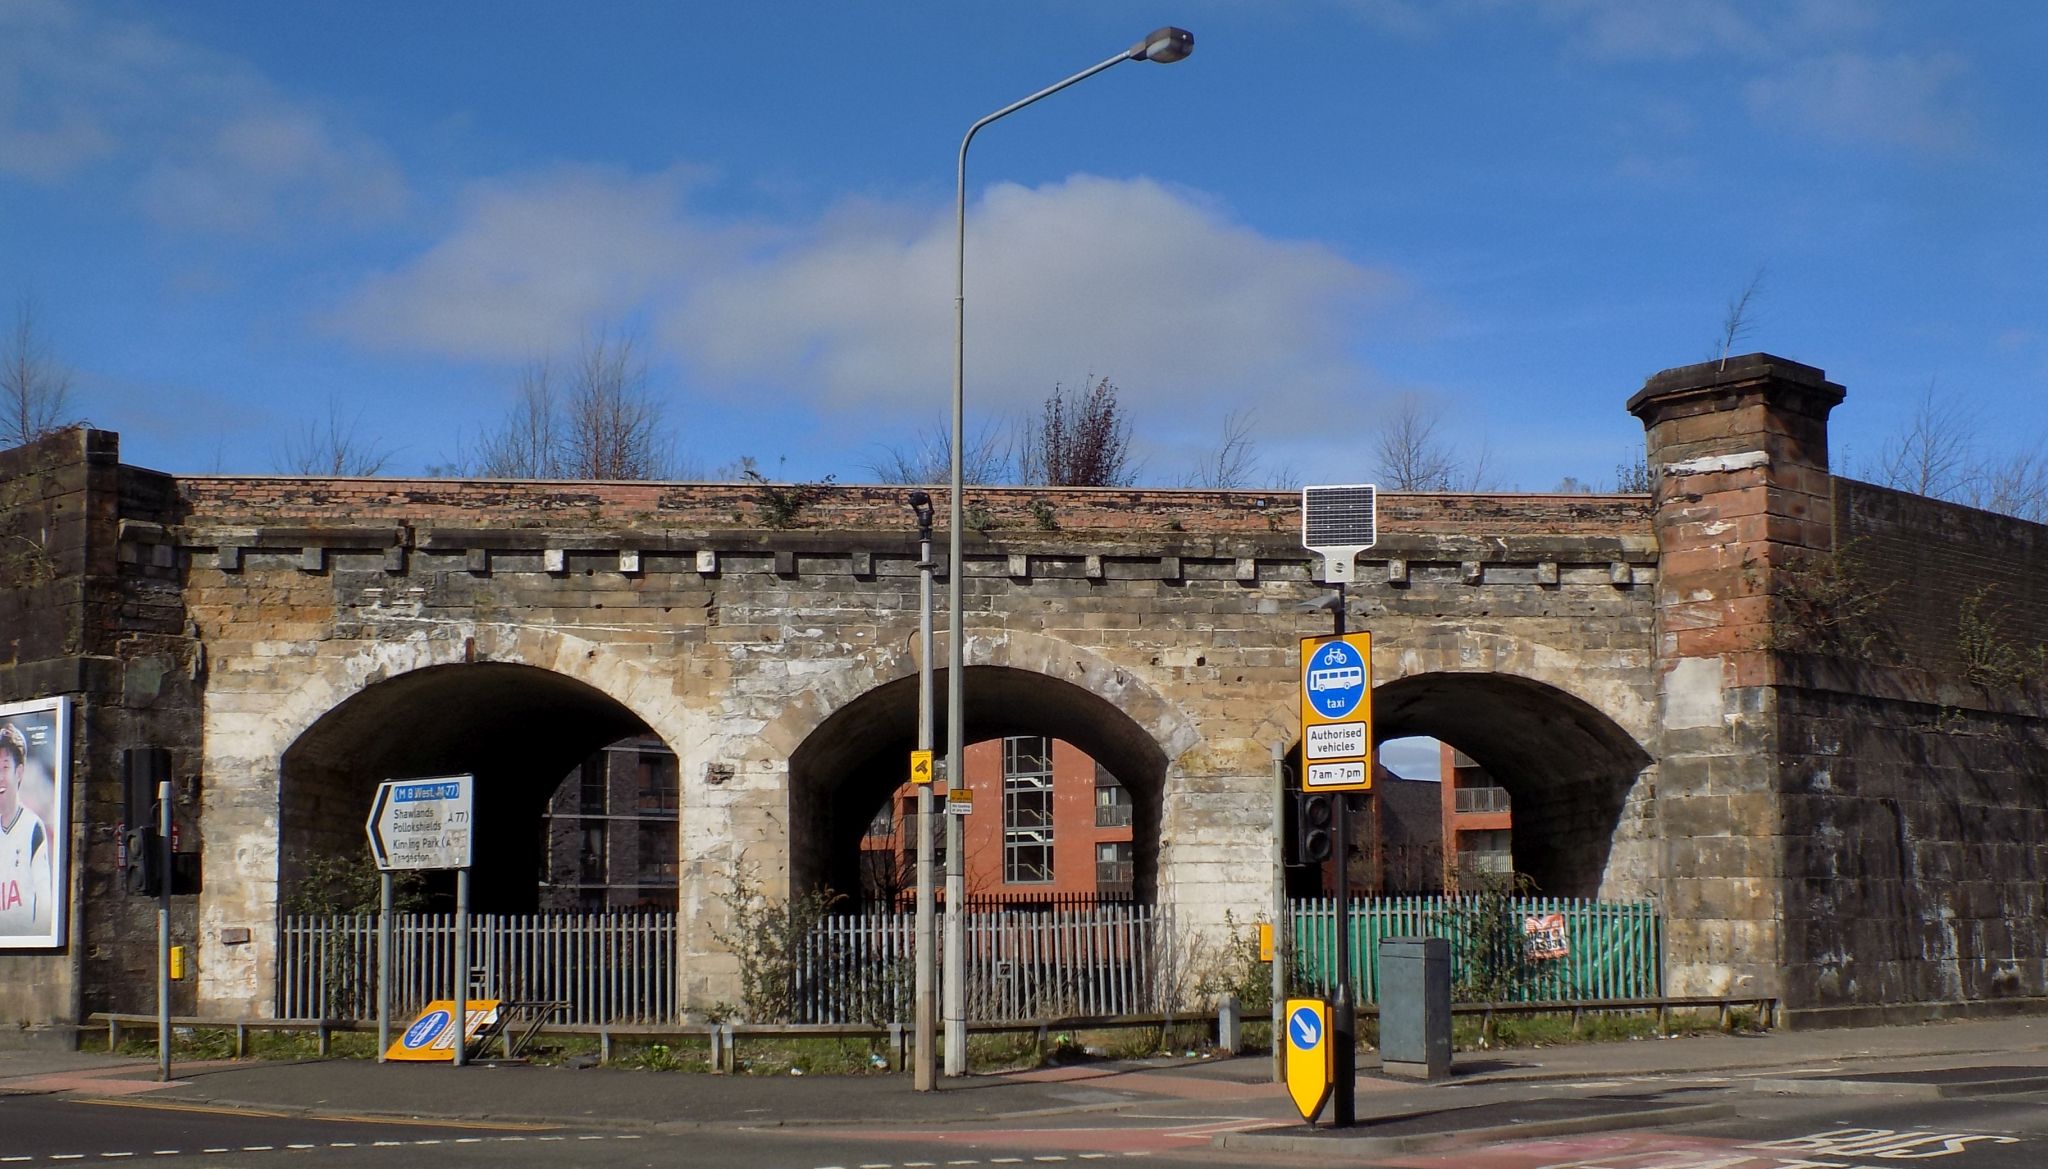 Railway Arches in the Gorbals District